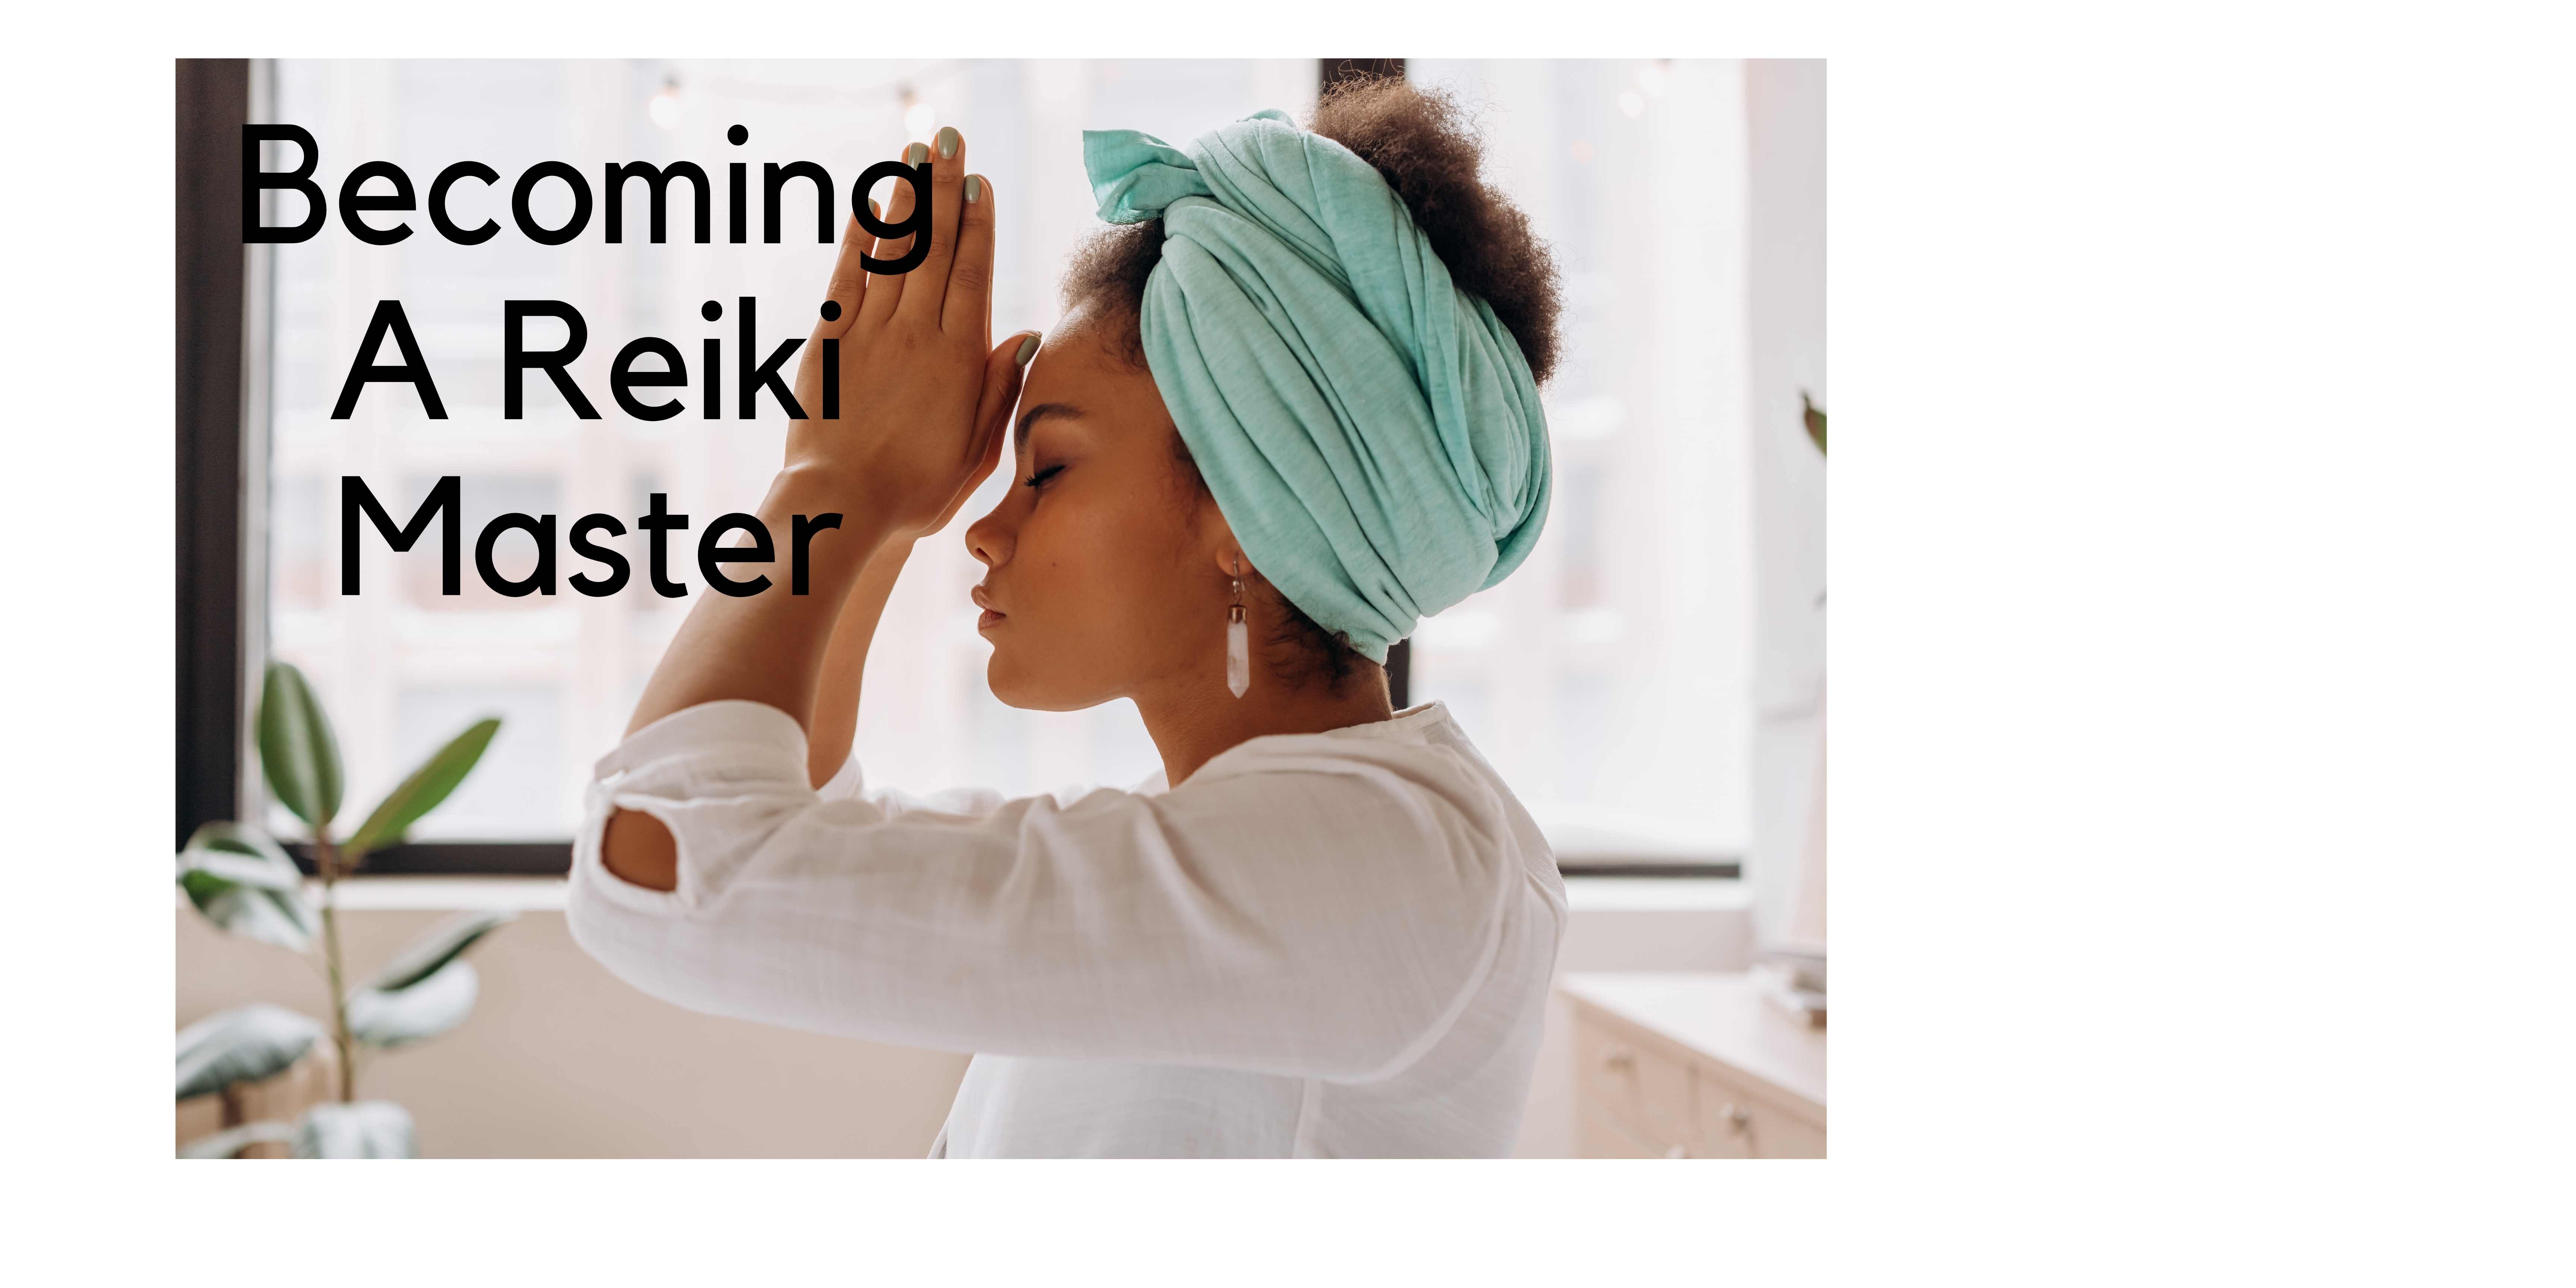 What Needs To Be Considered In Becoming A Reiki Master?